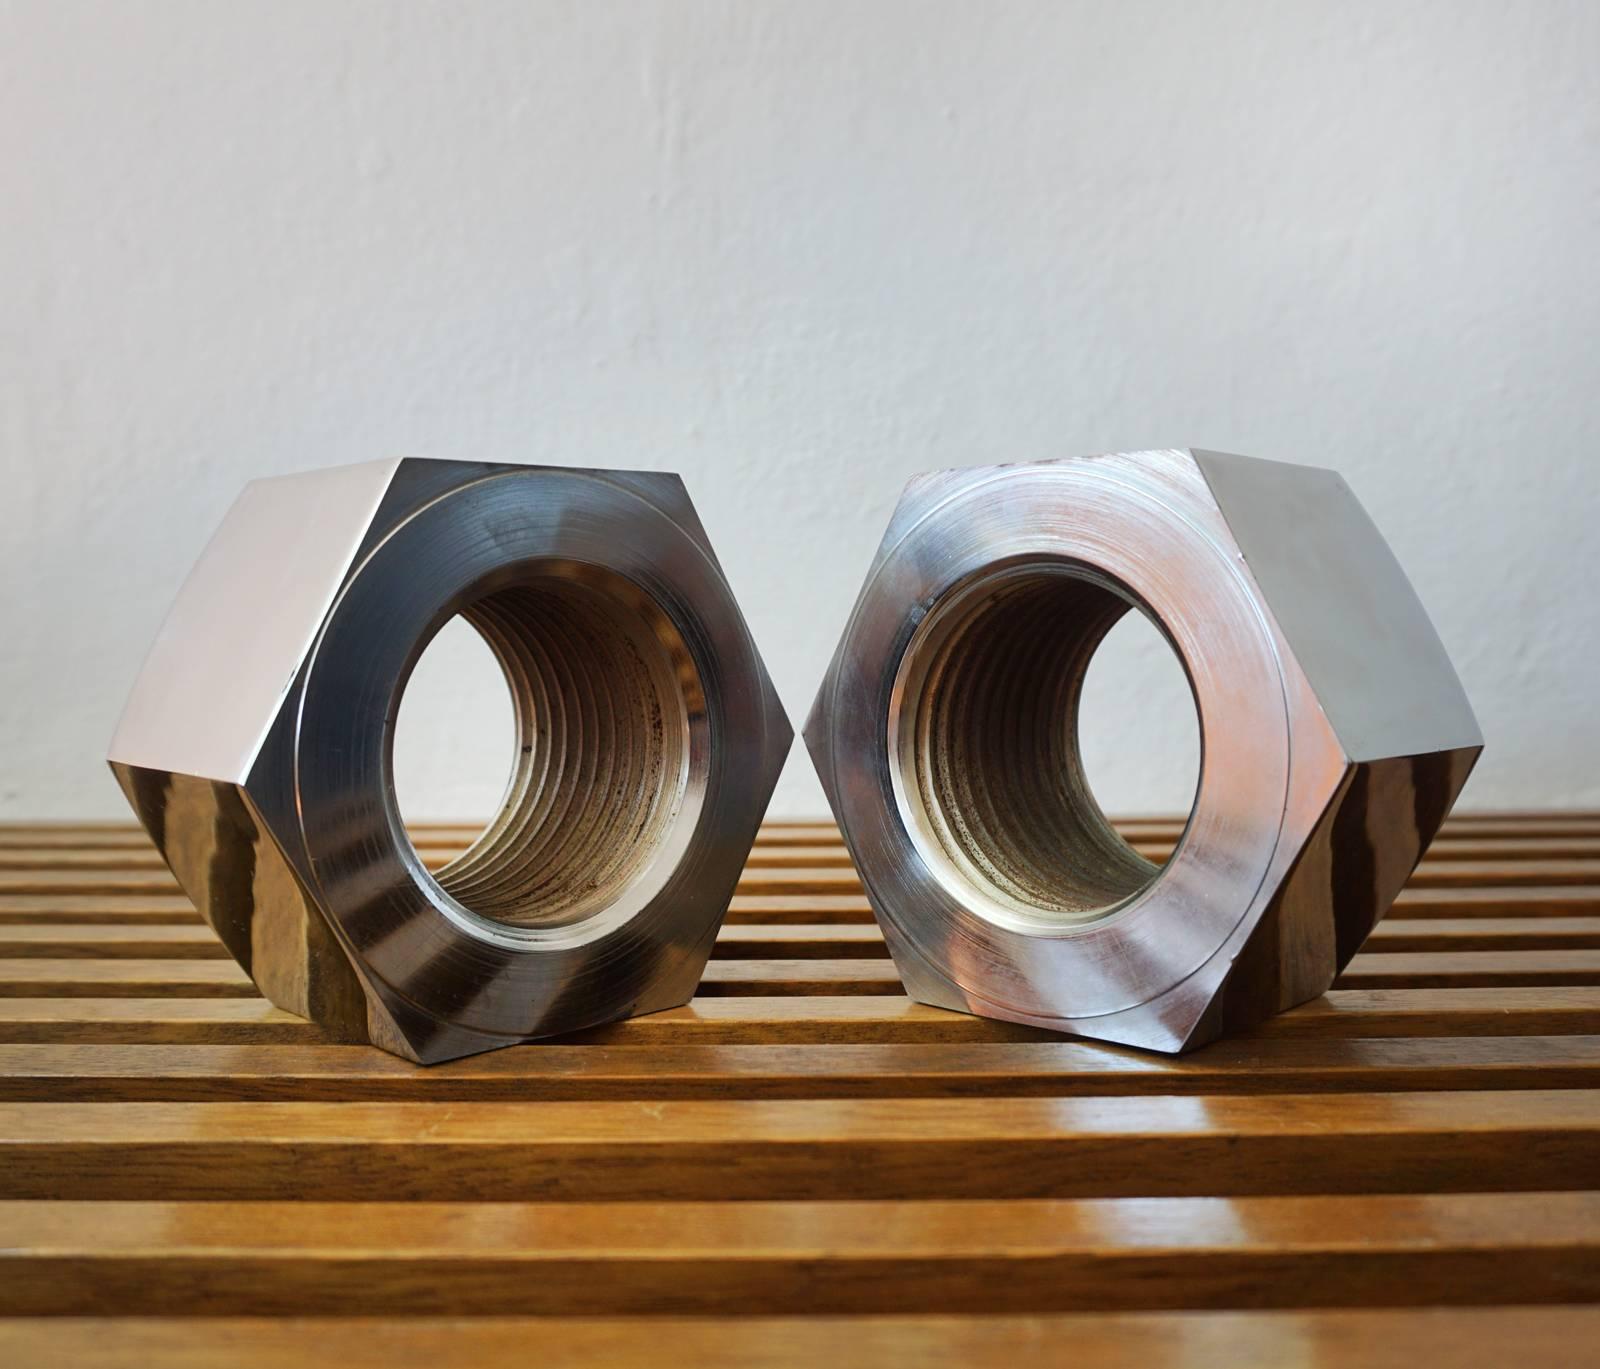 American Polished Nickel Nut Bookends by Design Line